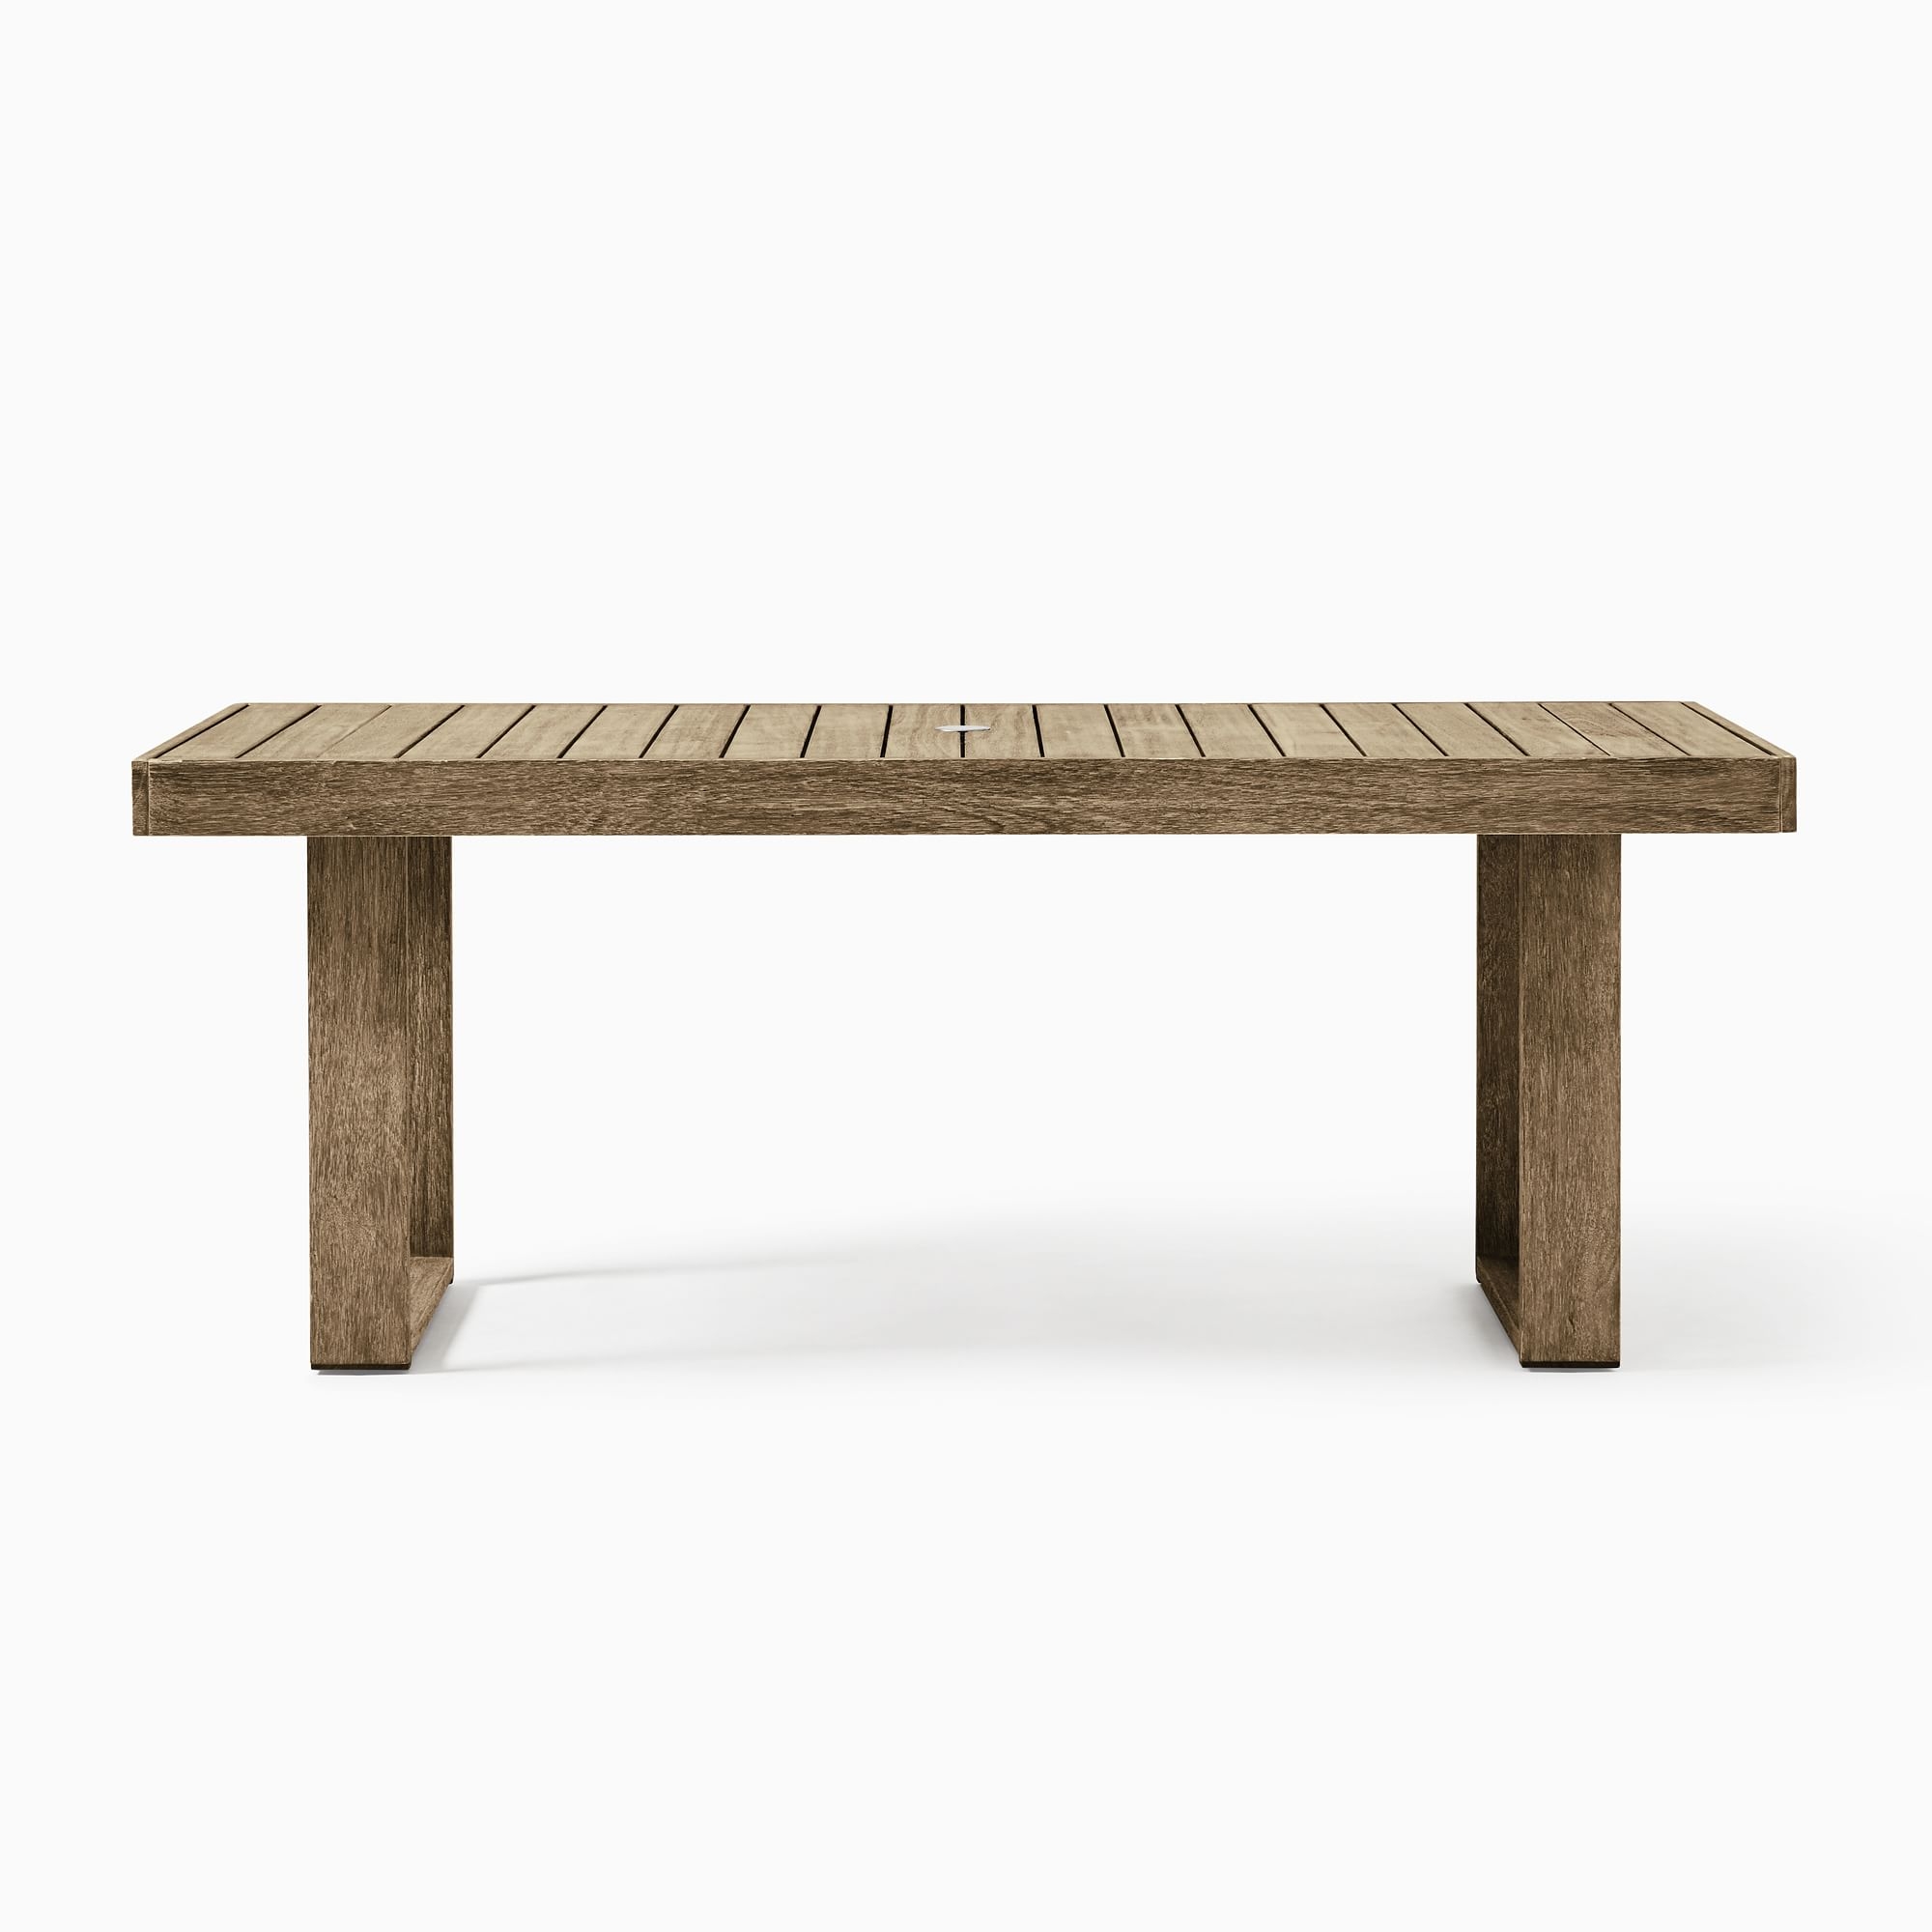 Portside Outdoor 76.5 in Rectangle Dining Table, Driftwood - Image 3